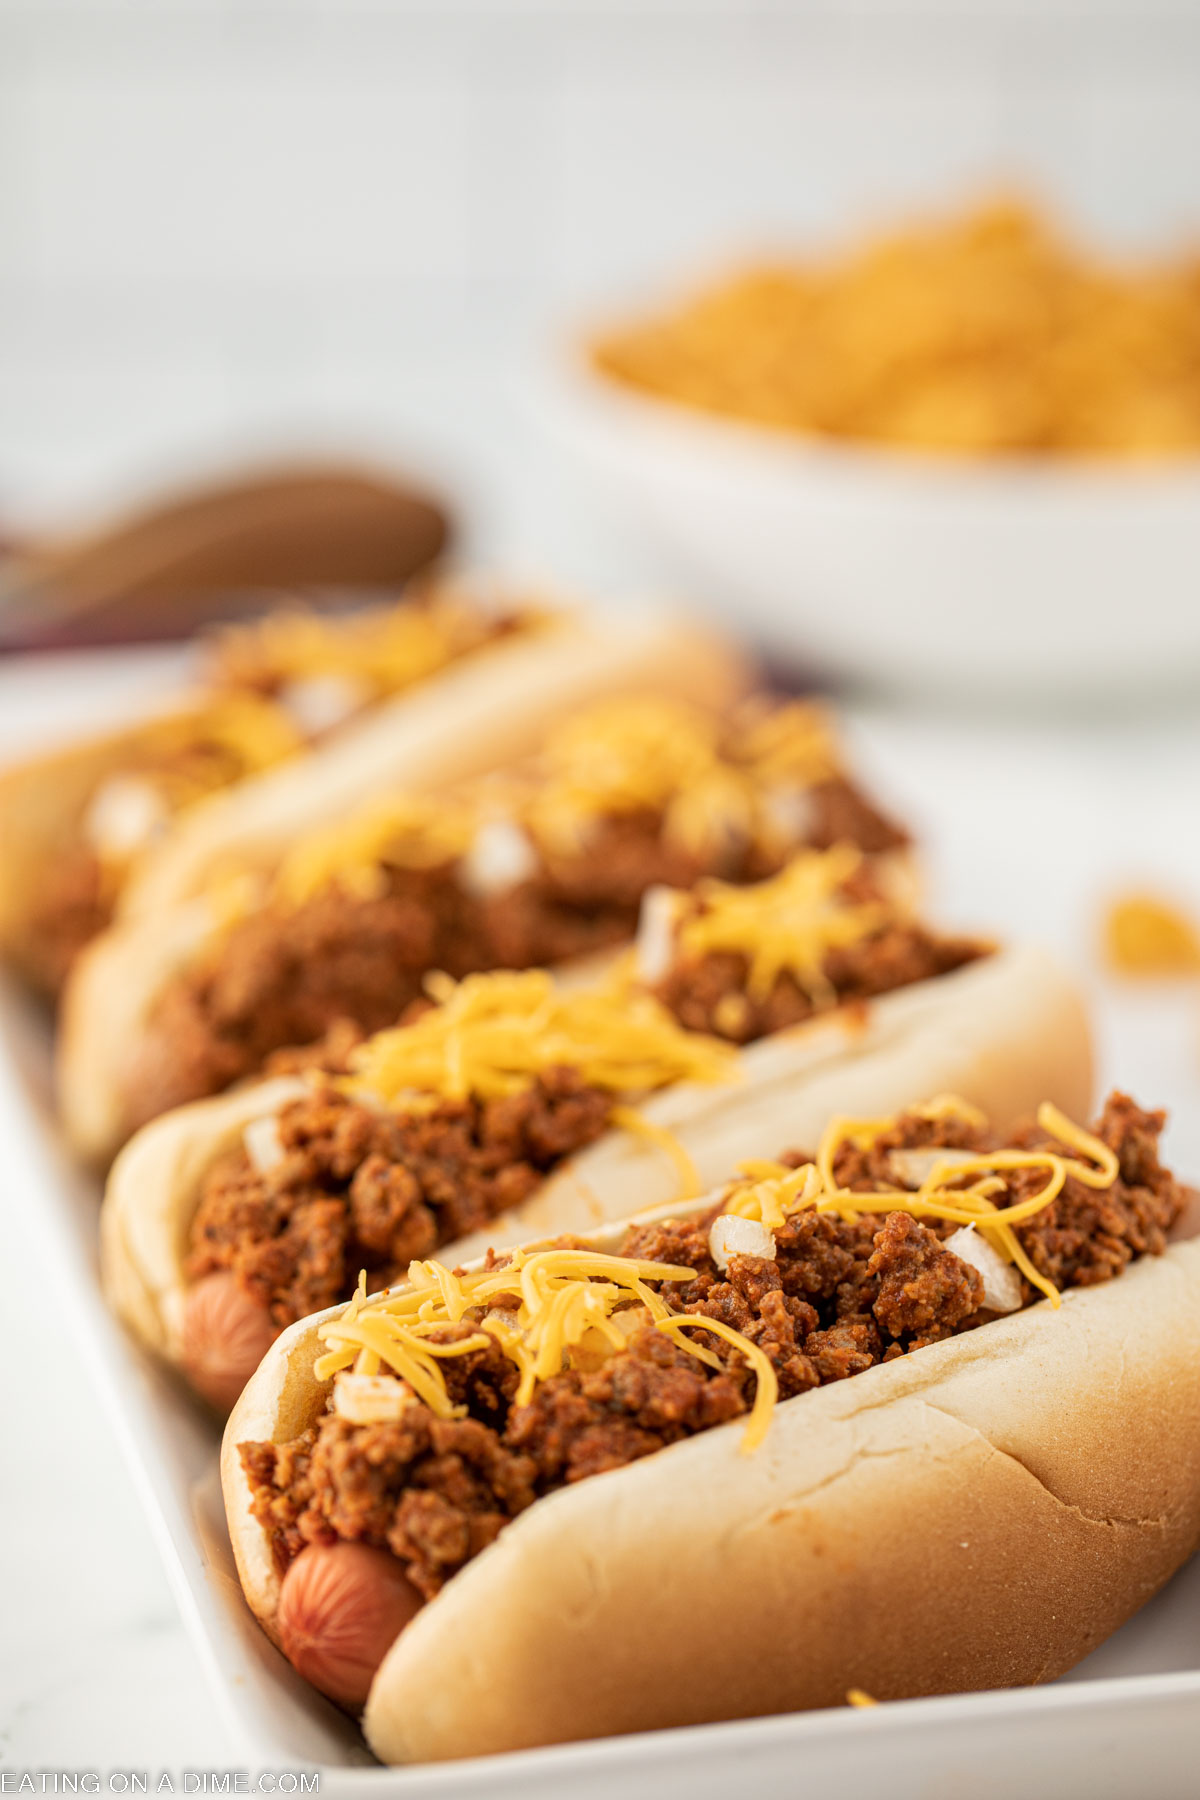 Hot dogs topped with chili, cheese, and onions on a platter